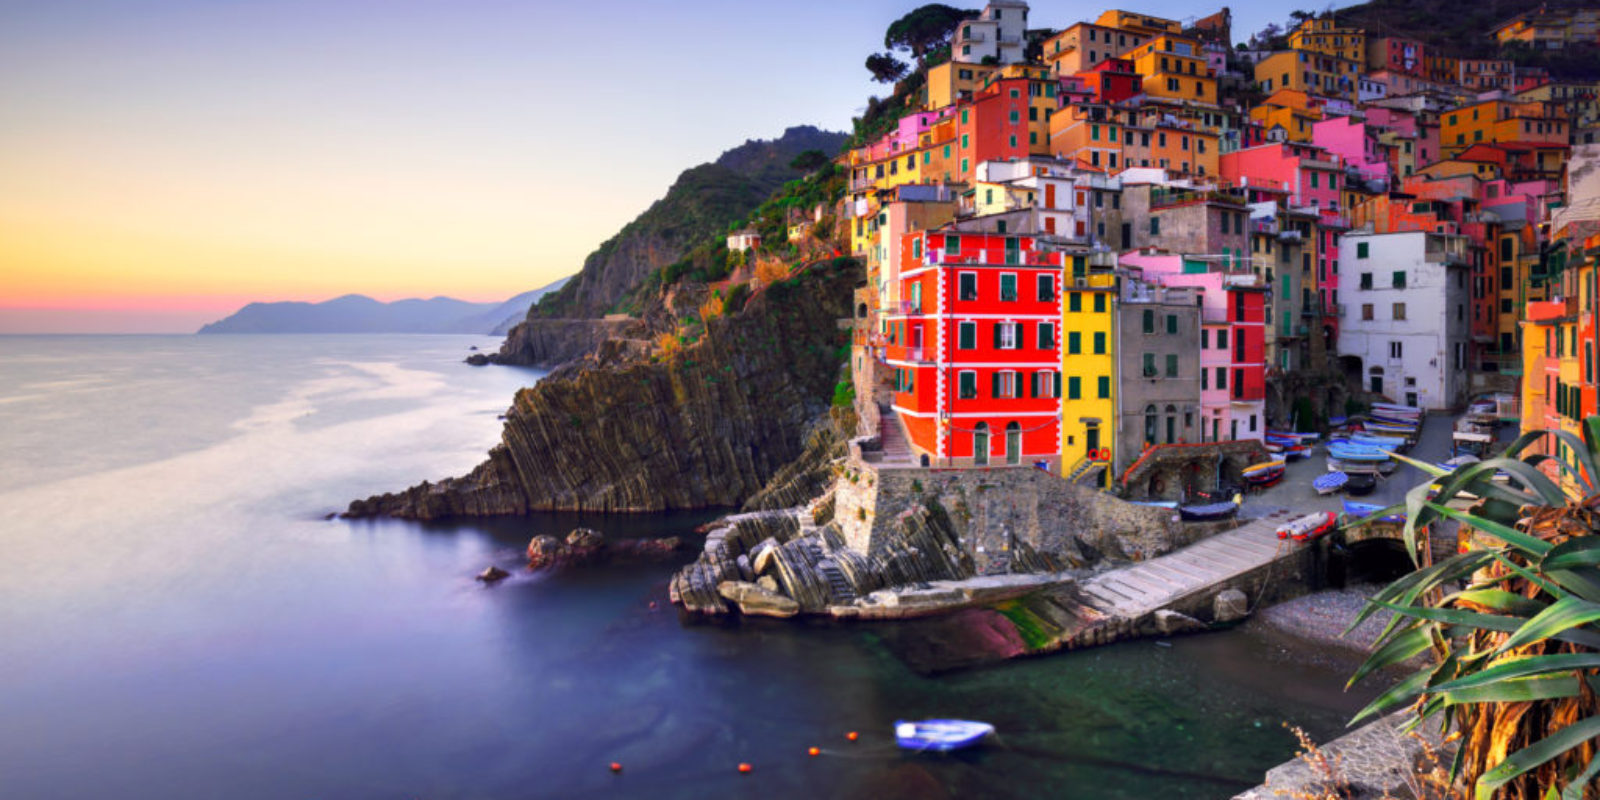 Italy is a great first-time-to-Europe destination! With incredible history & architecture, rugged hiking trails, and delicious food, there's something for everyone in the family!